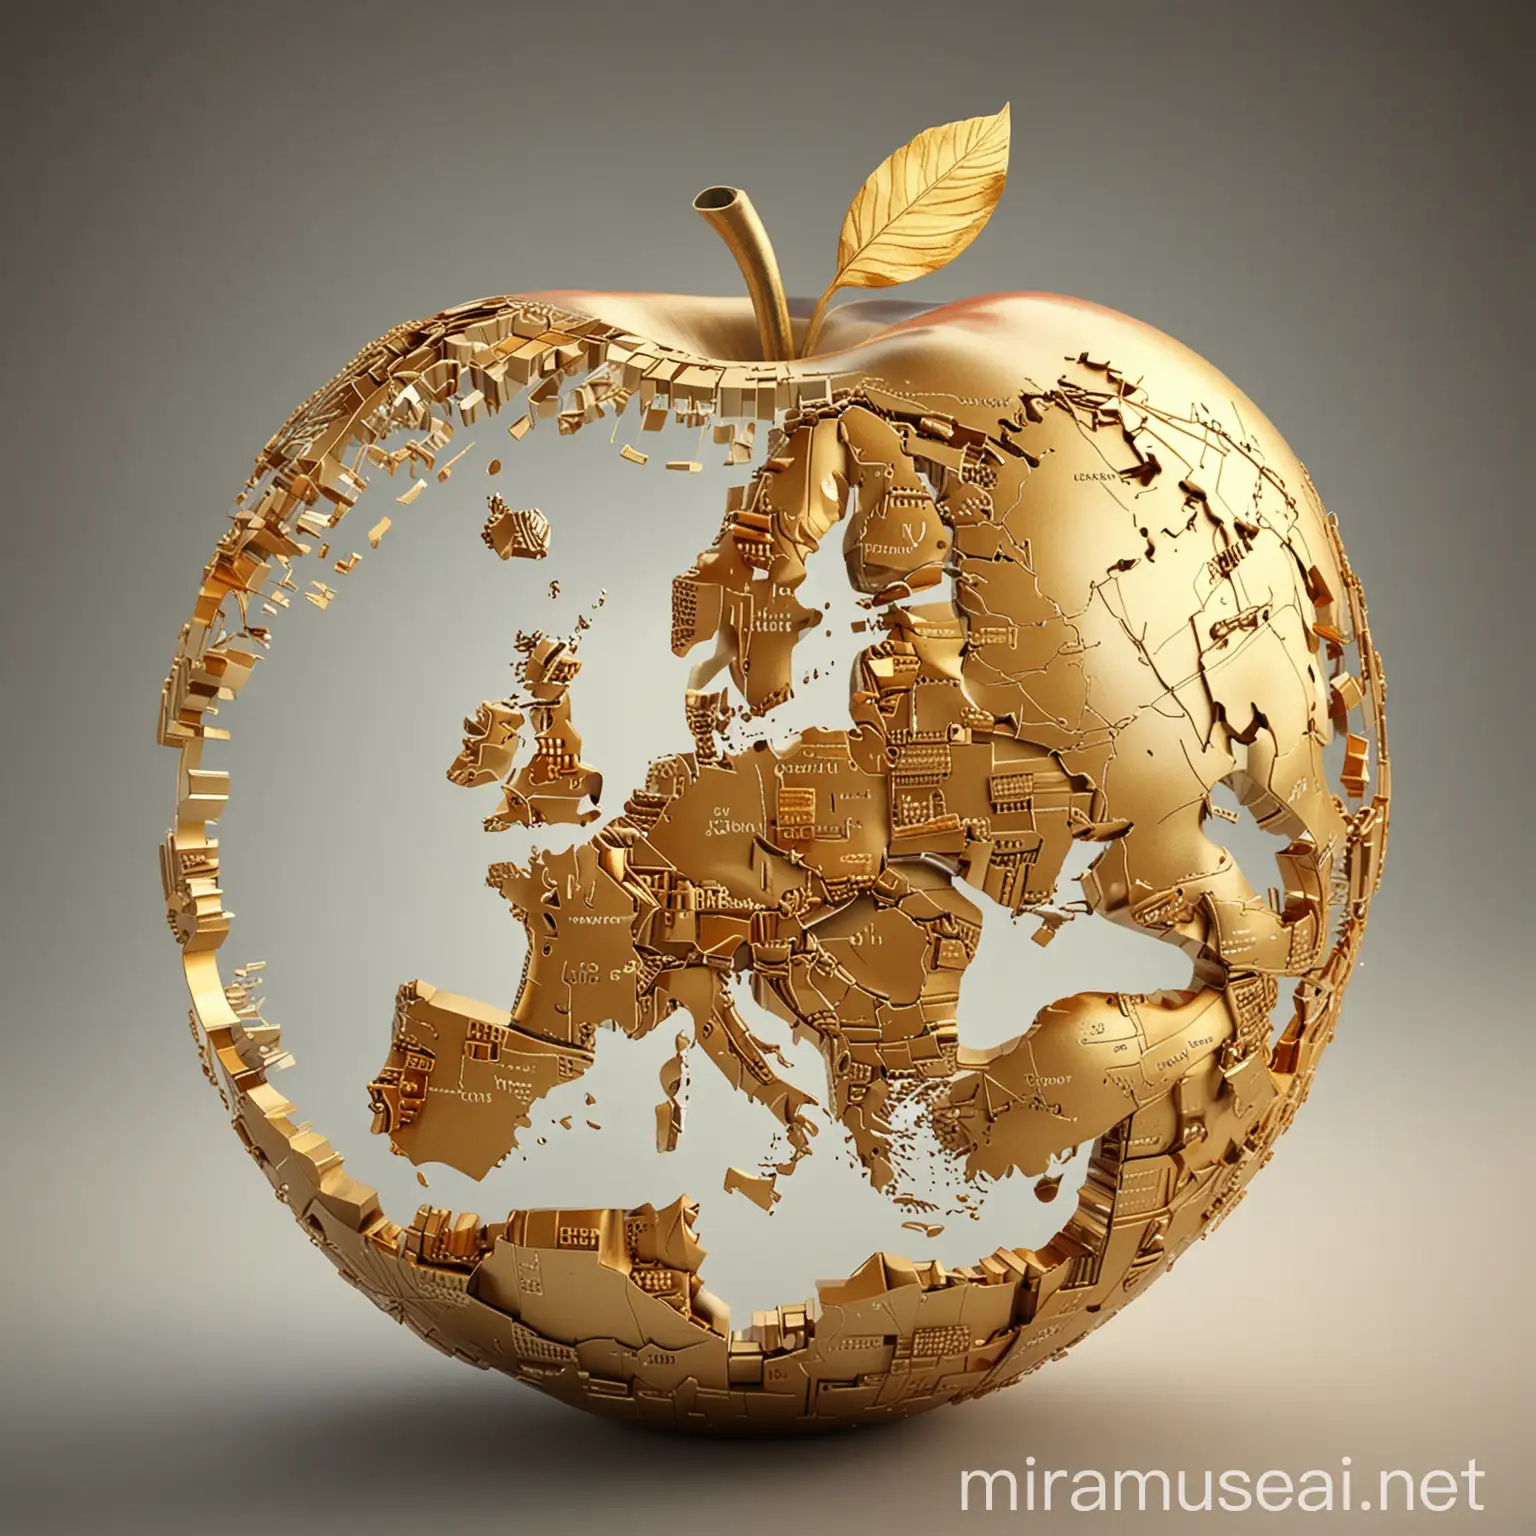 Golden Apple Crafted from Europe Map Fragments